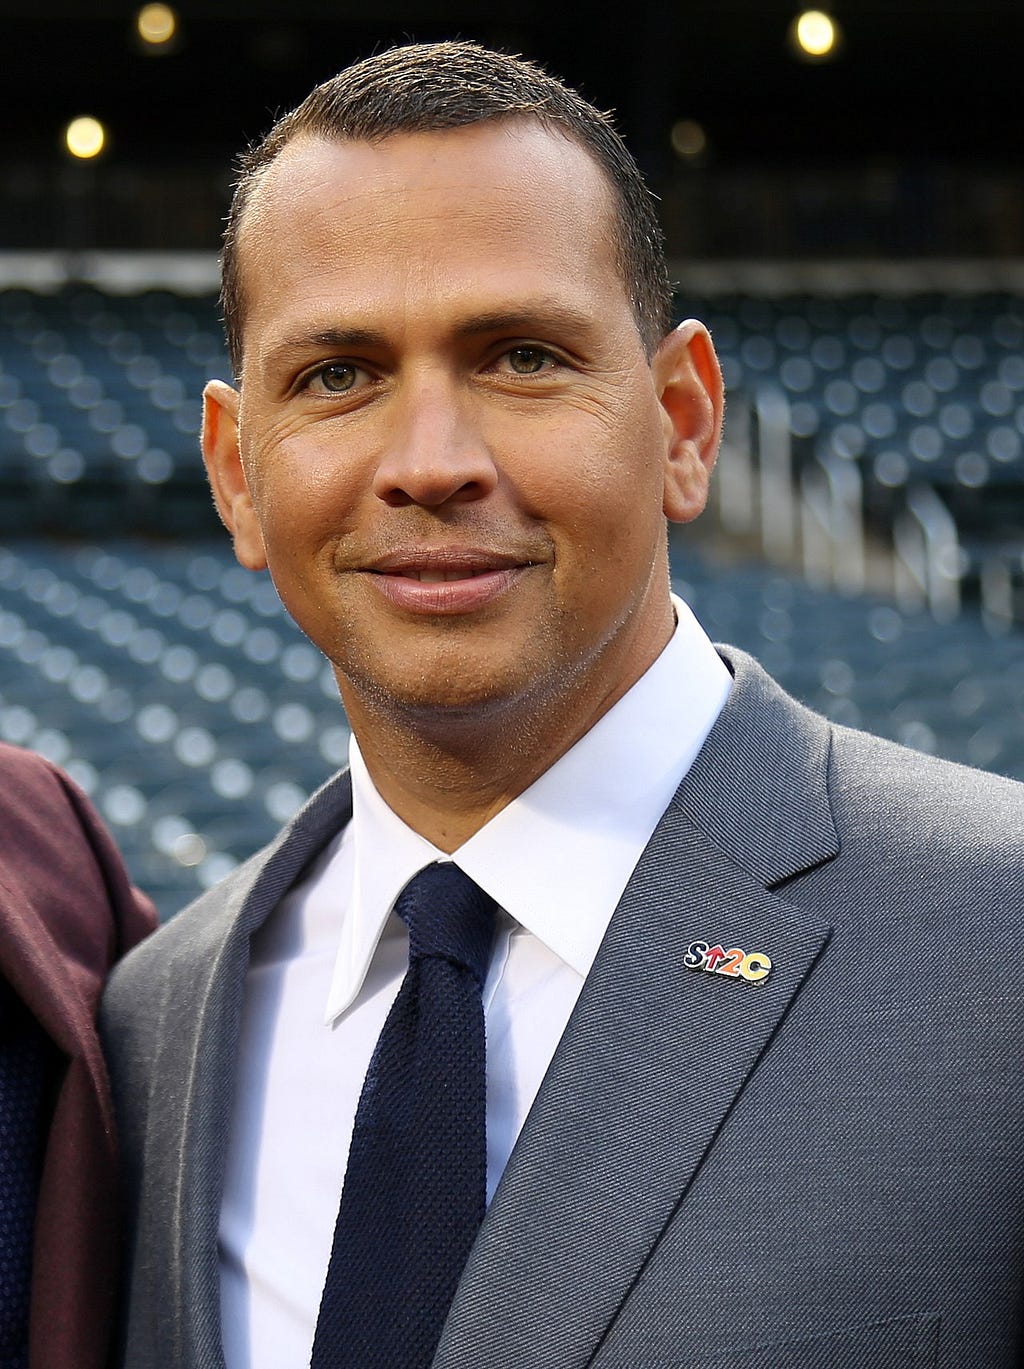 Potential Mets bidder and former All-Star Major League Baseball player Alex Rodriguez.